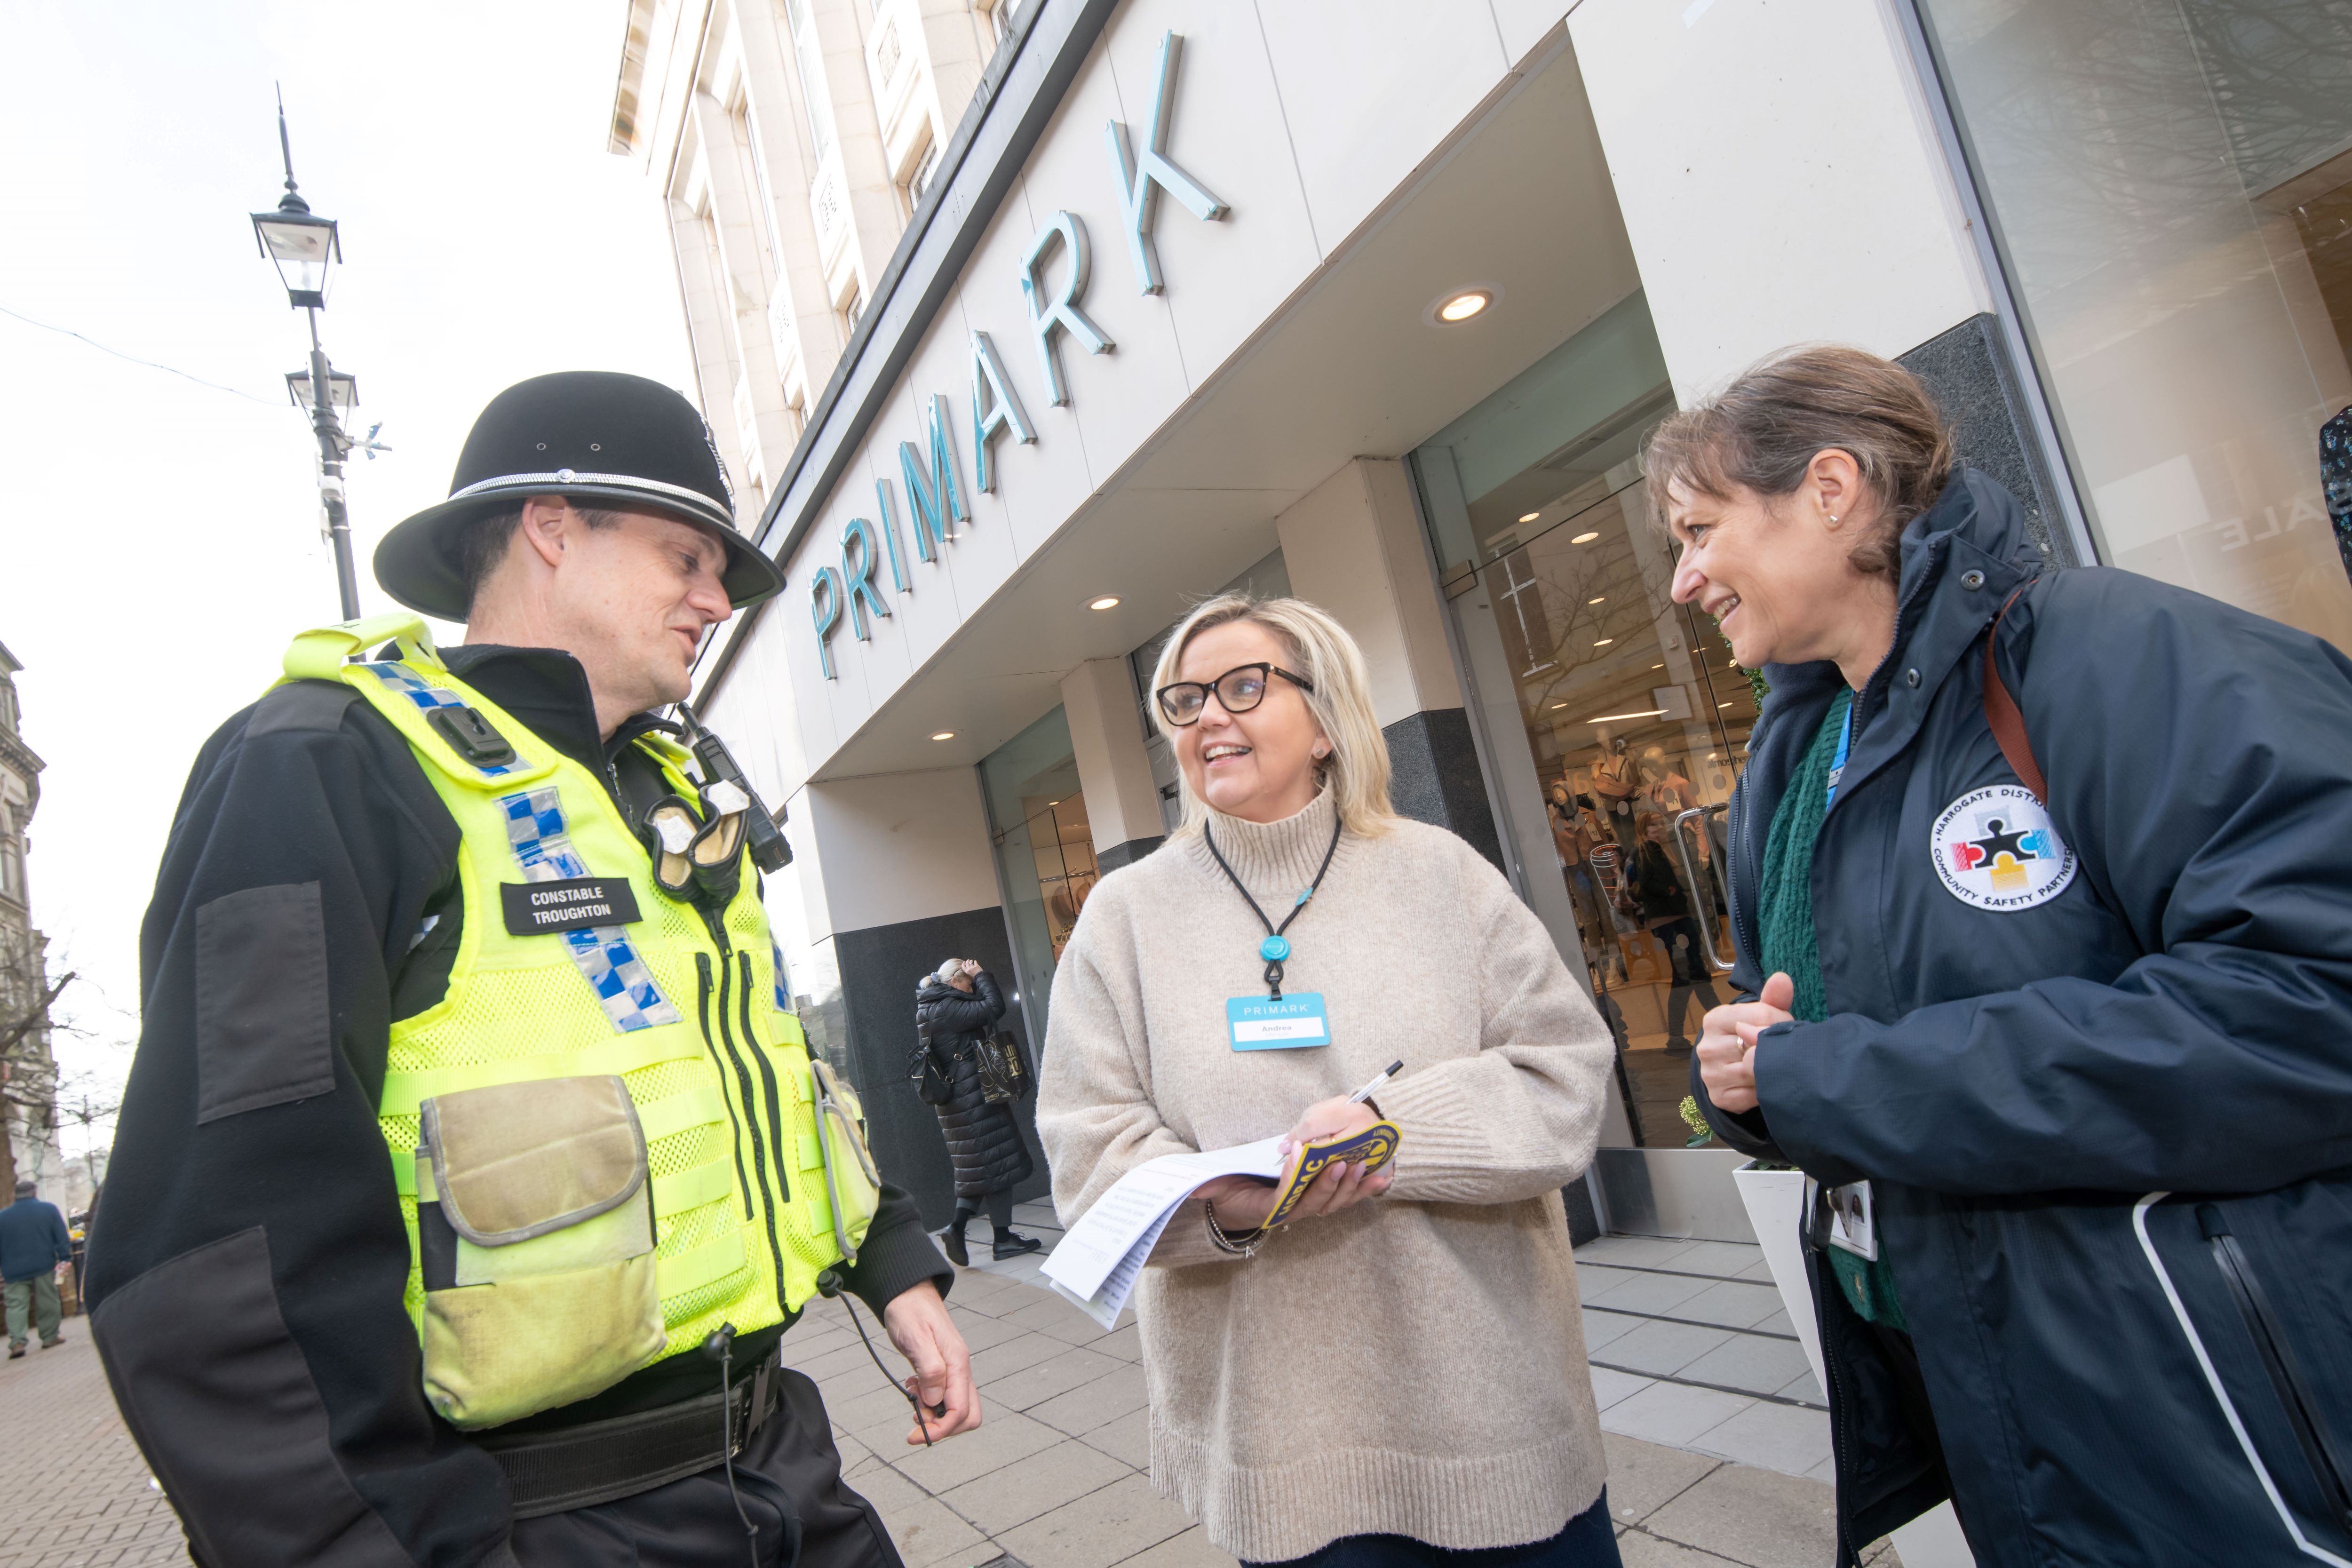 North Yorkshire Council’s community safety and CCTV manager, Julia Stack, speaks with Primark store manager, Andrea Thornborrow, and North Yorkshire Police officer, PC Kelvin Troughton, at the launch of Operation Spotlight in Harrogate.